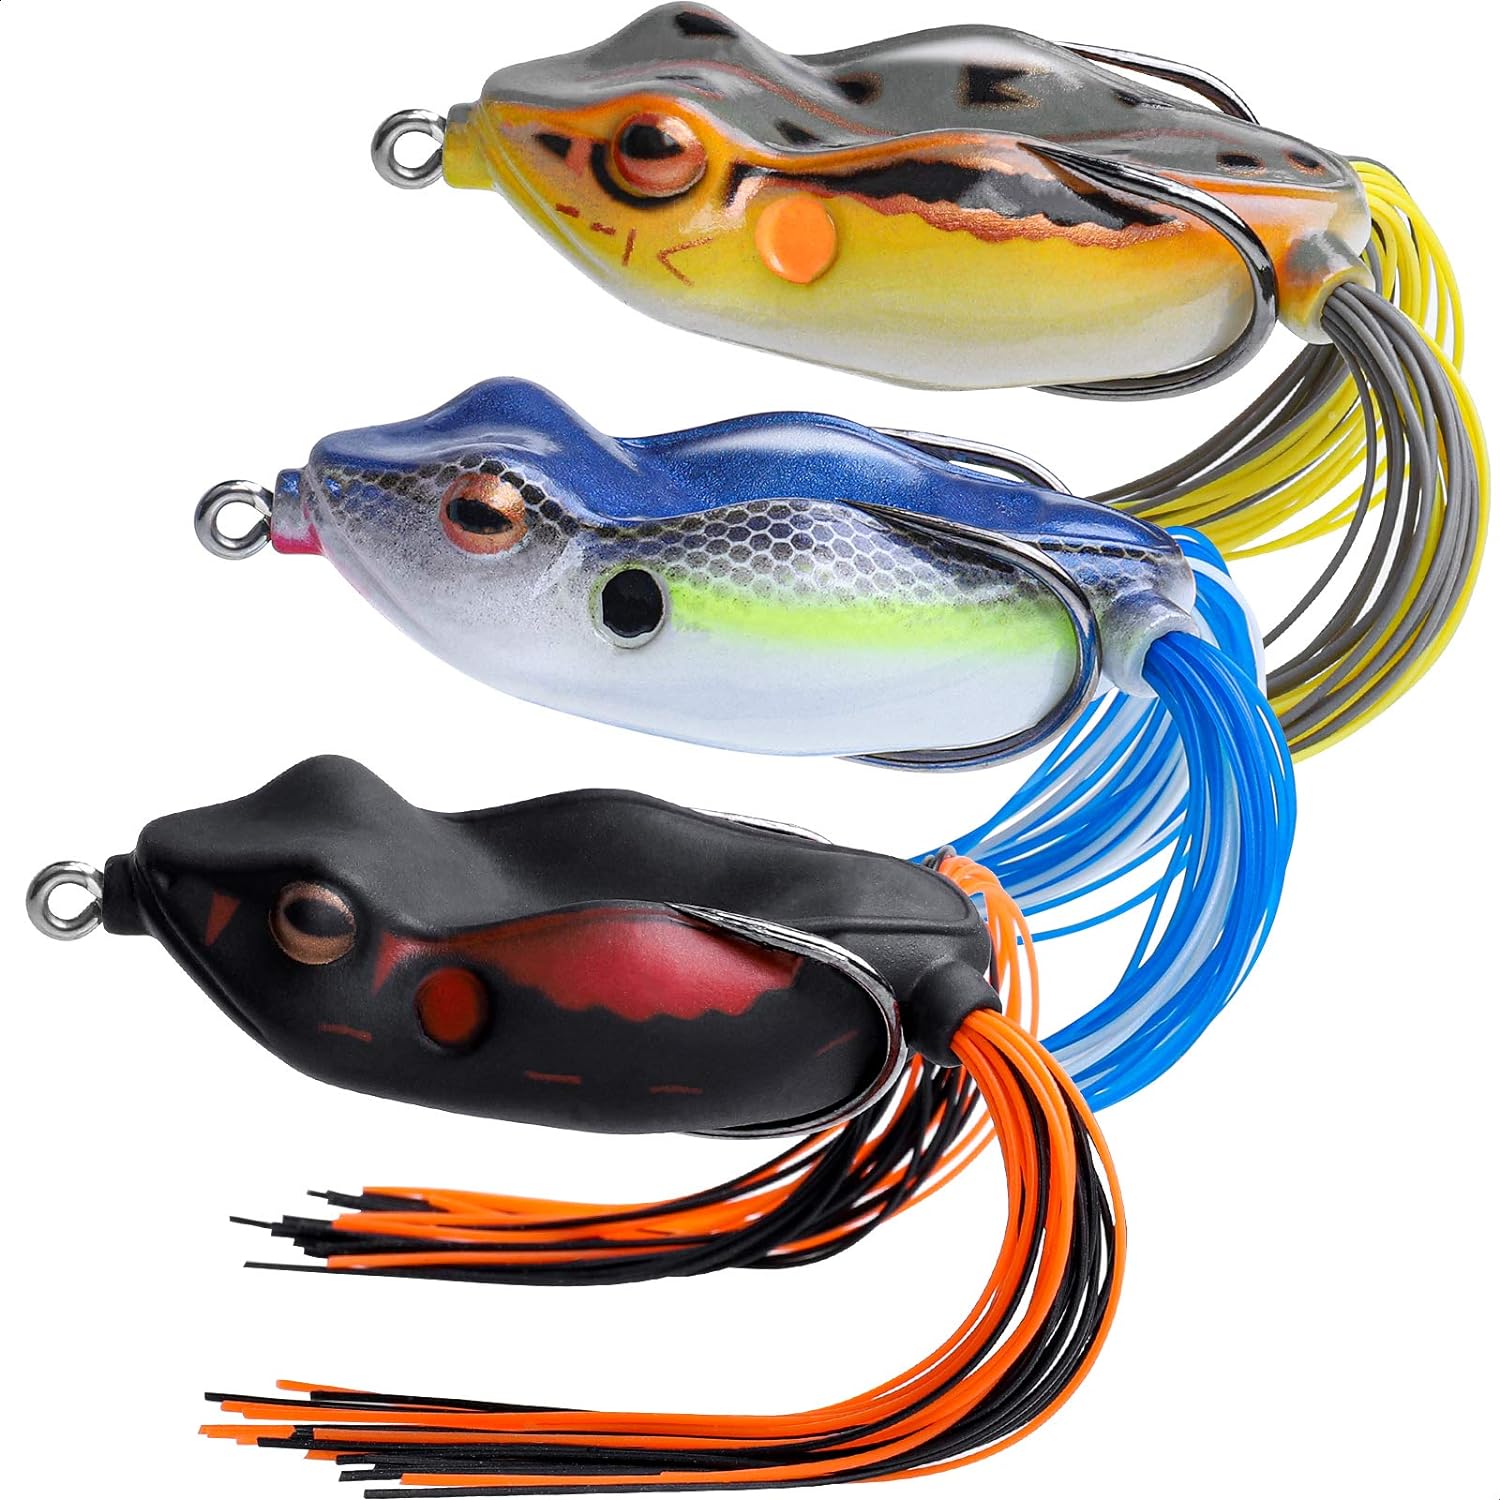 Topwater Frog Fishing Lure 5pcs Fishing Artificial Lures Fish/Frog Bait Hollow Body Soft Fish Lure Kit for Freshwater Saltwater Box Tackle